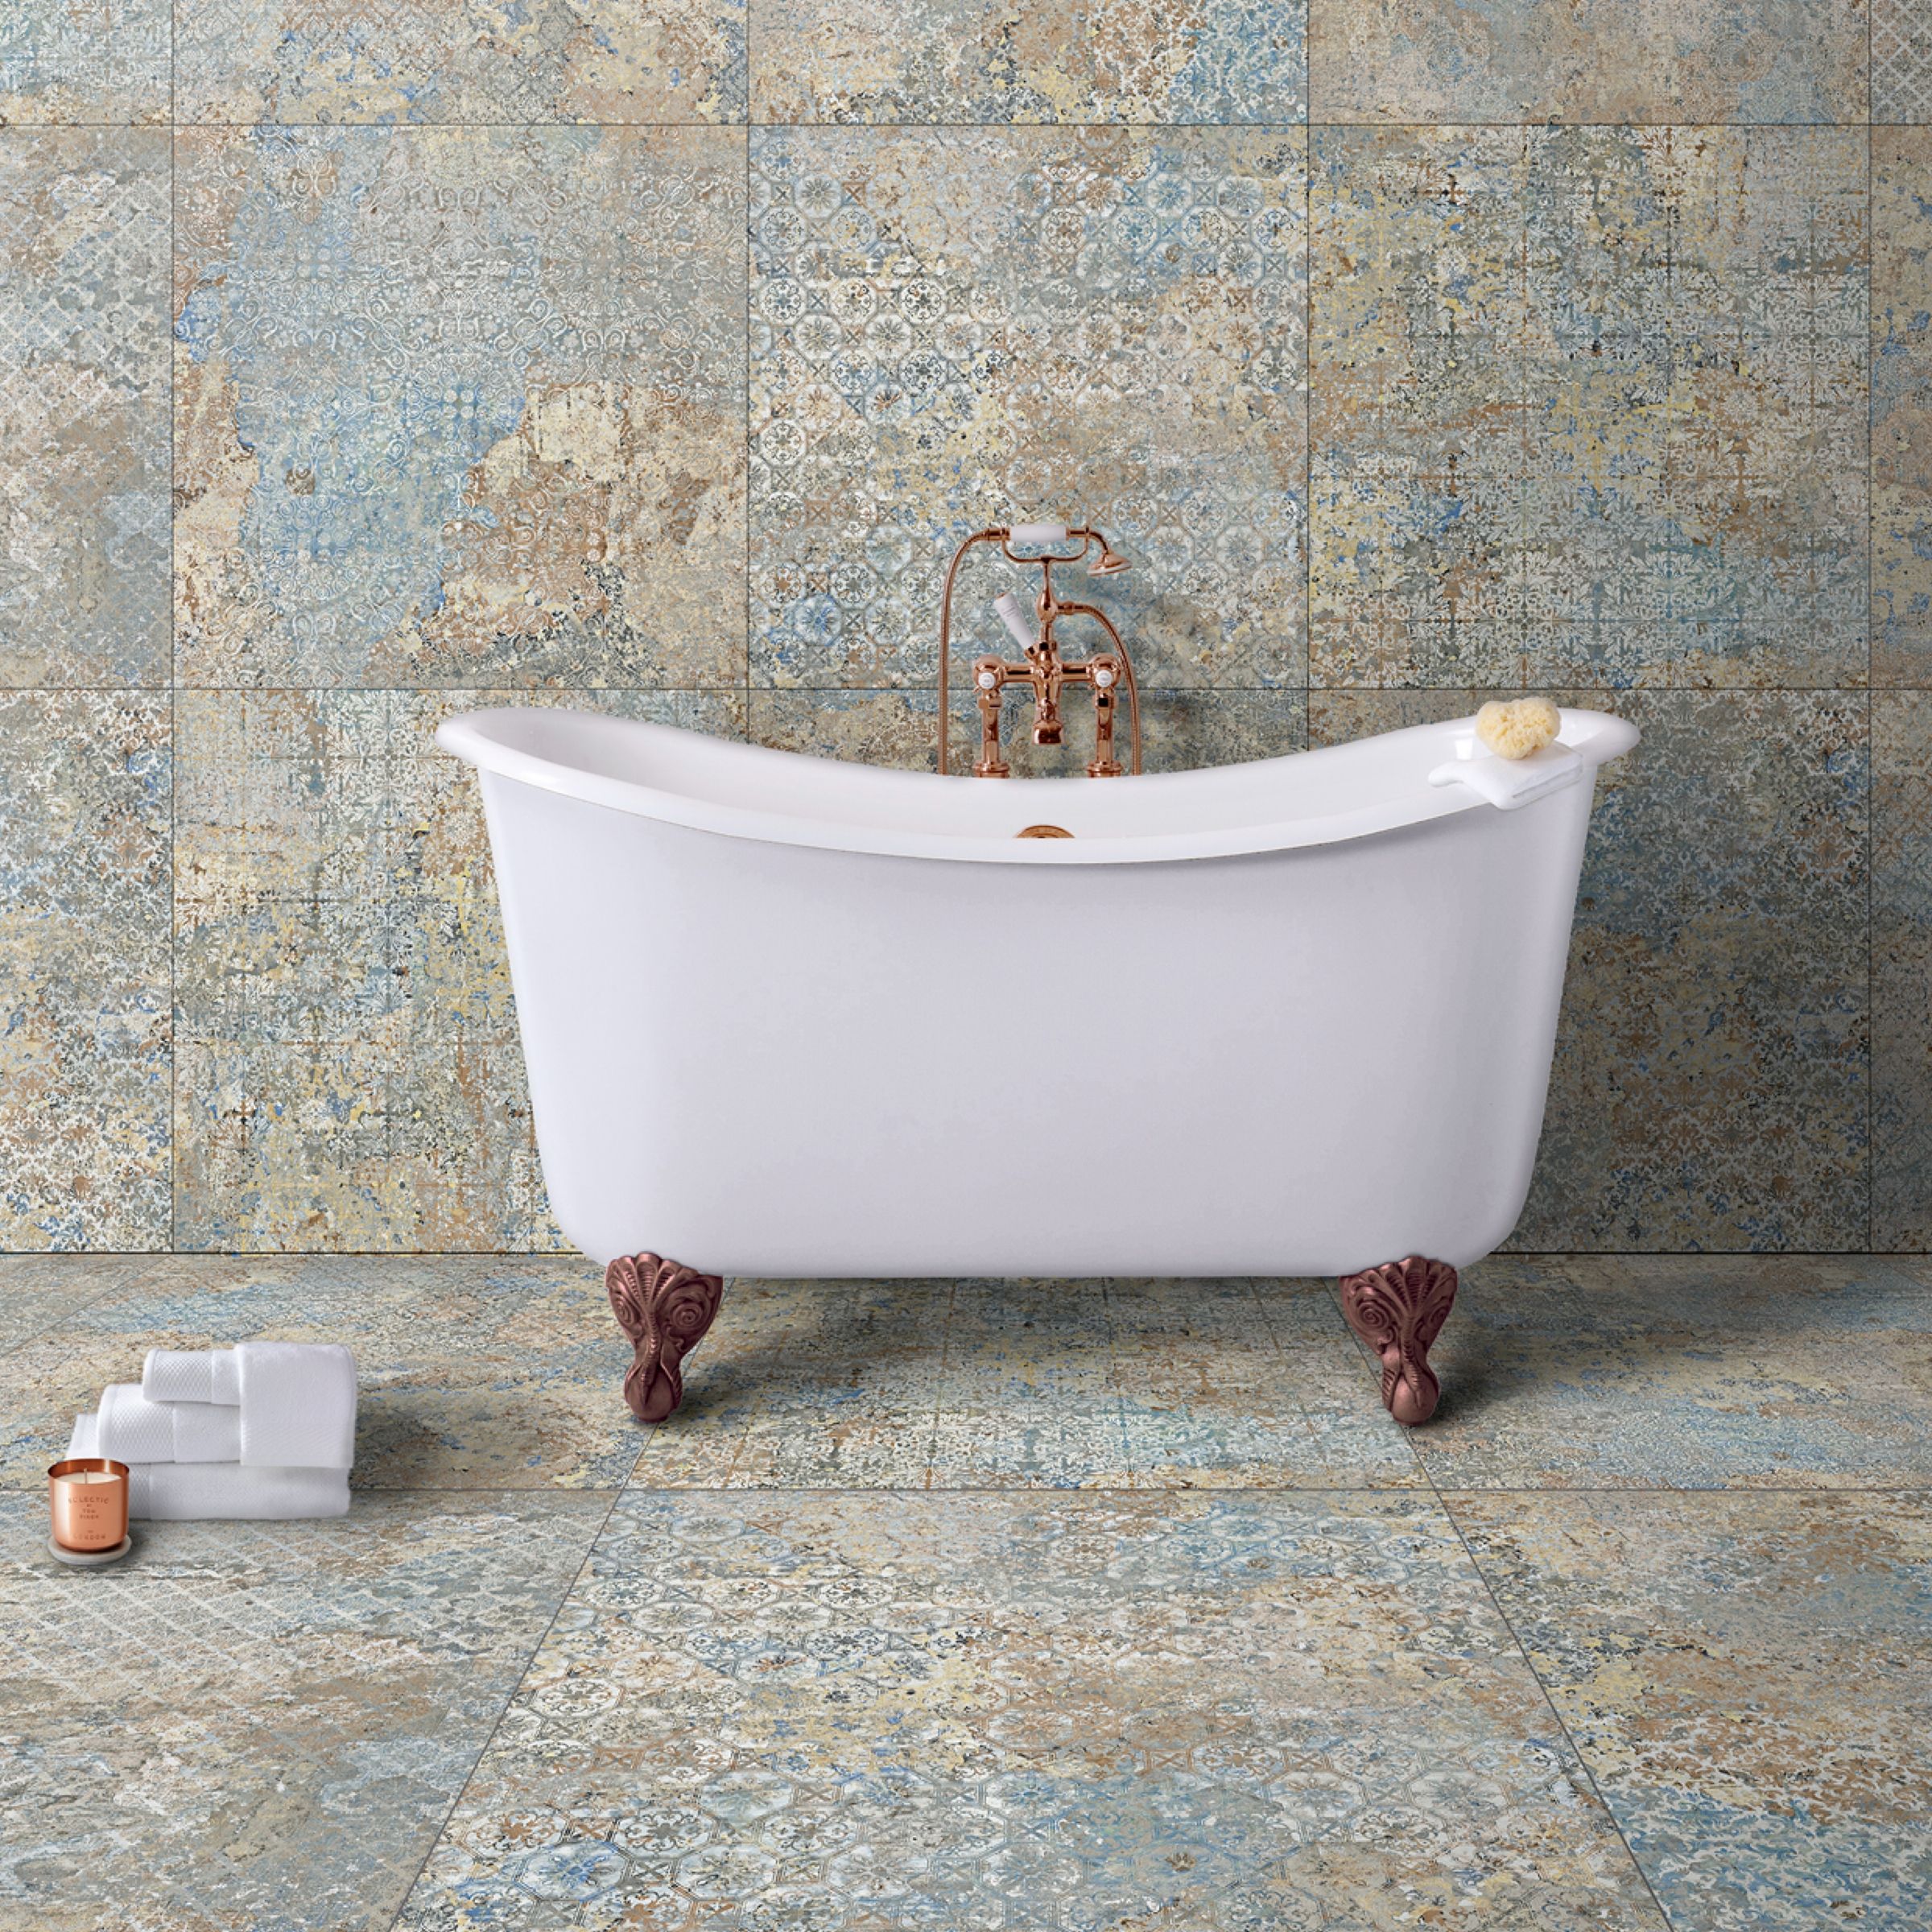 Pattern and Patchwork Tiles